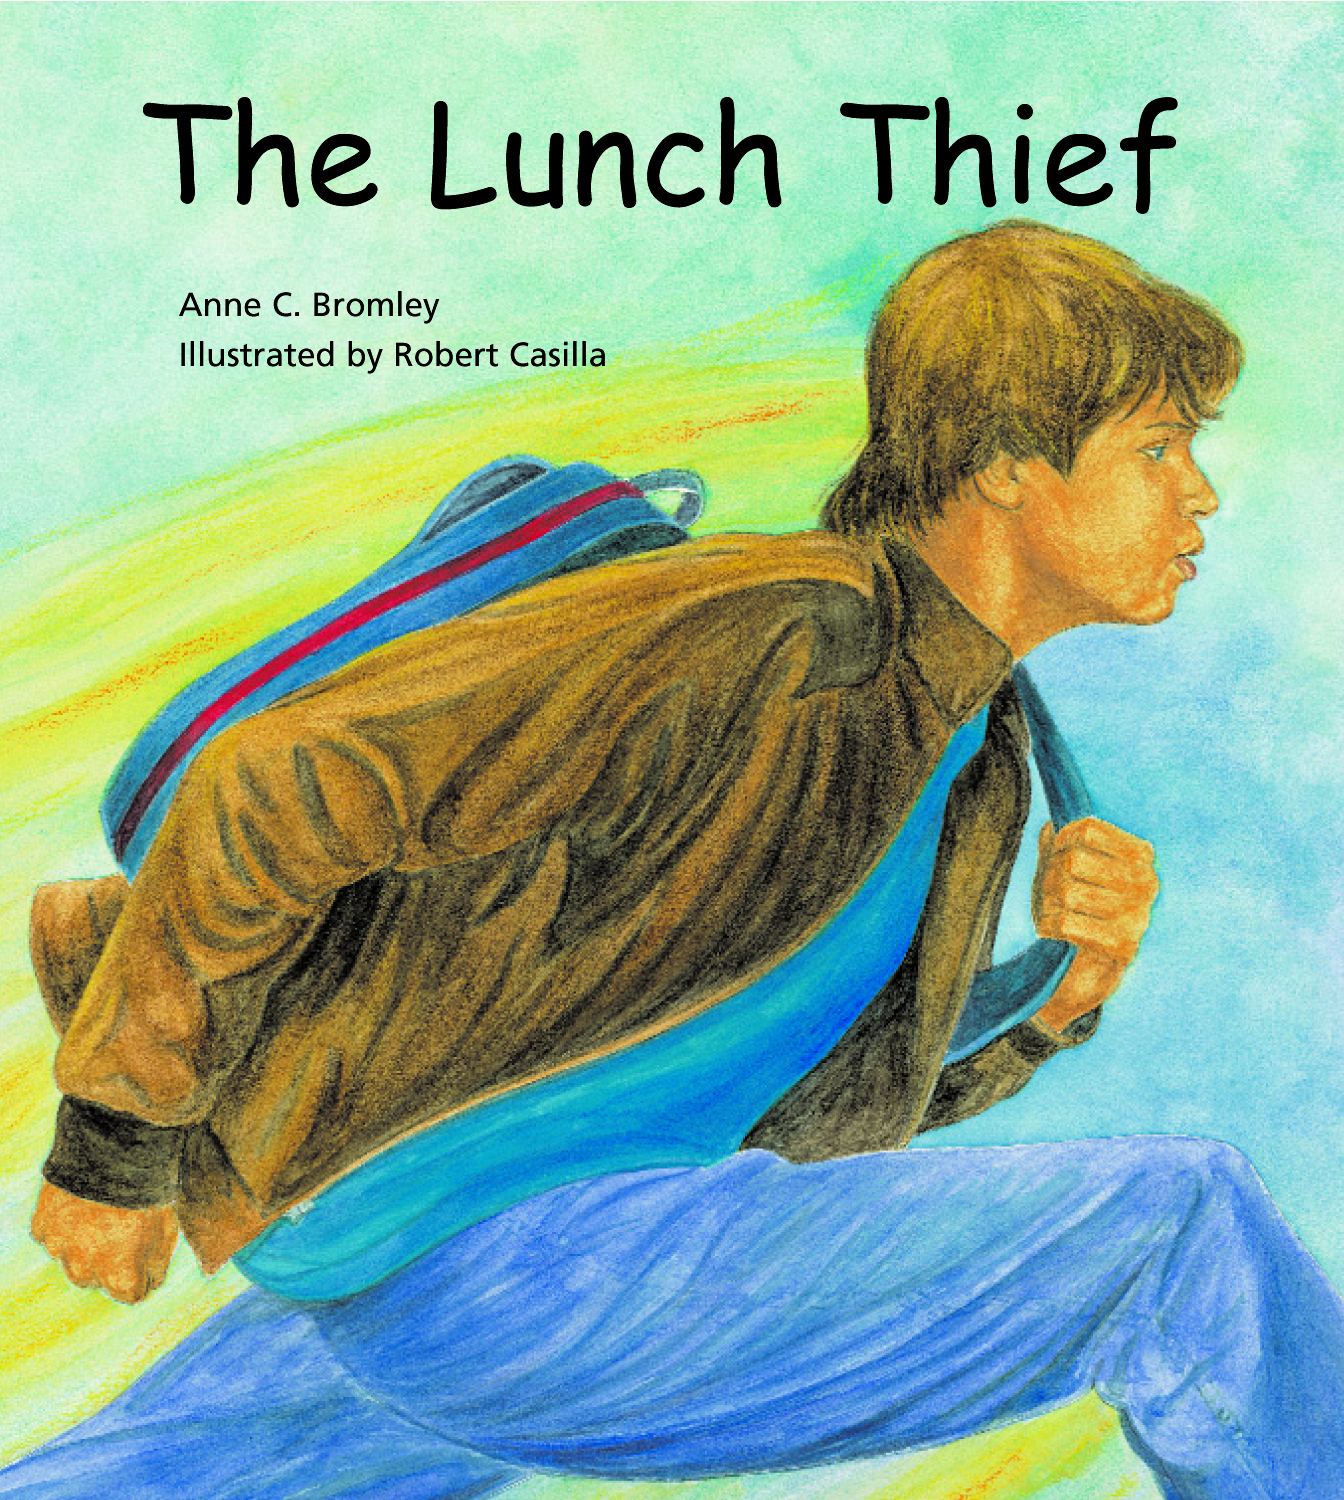 Children's Book Author Anne Bromley's Book-The Lunch Thief